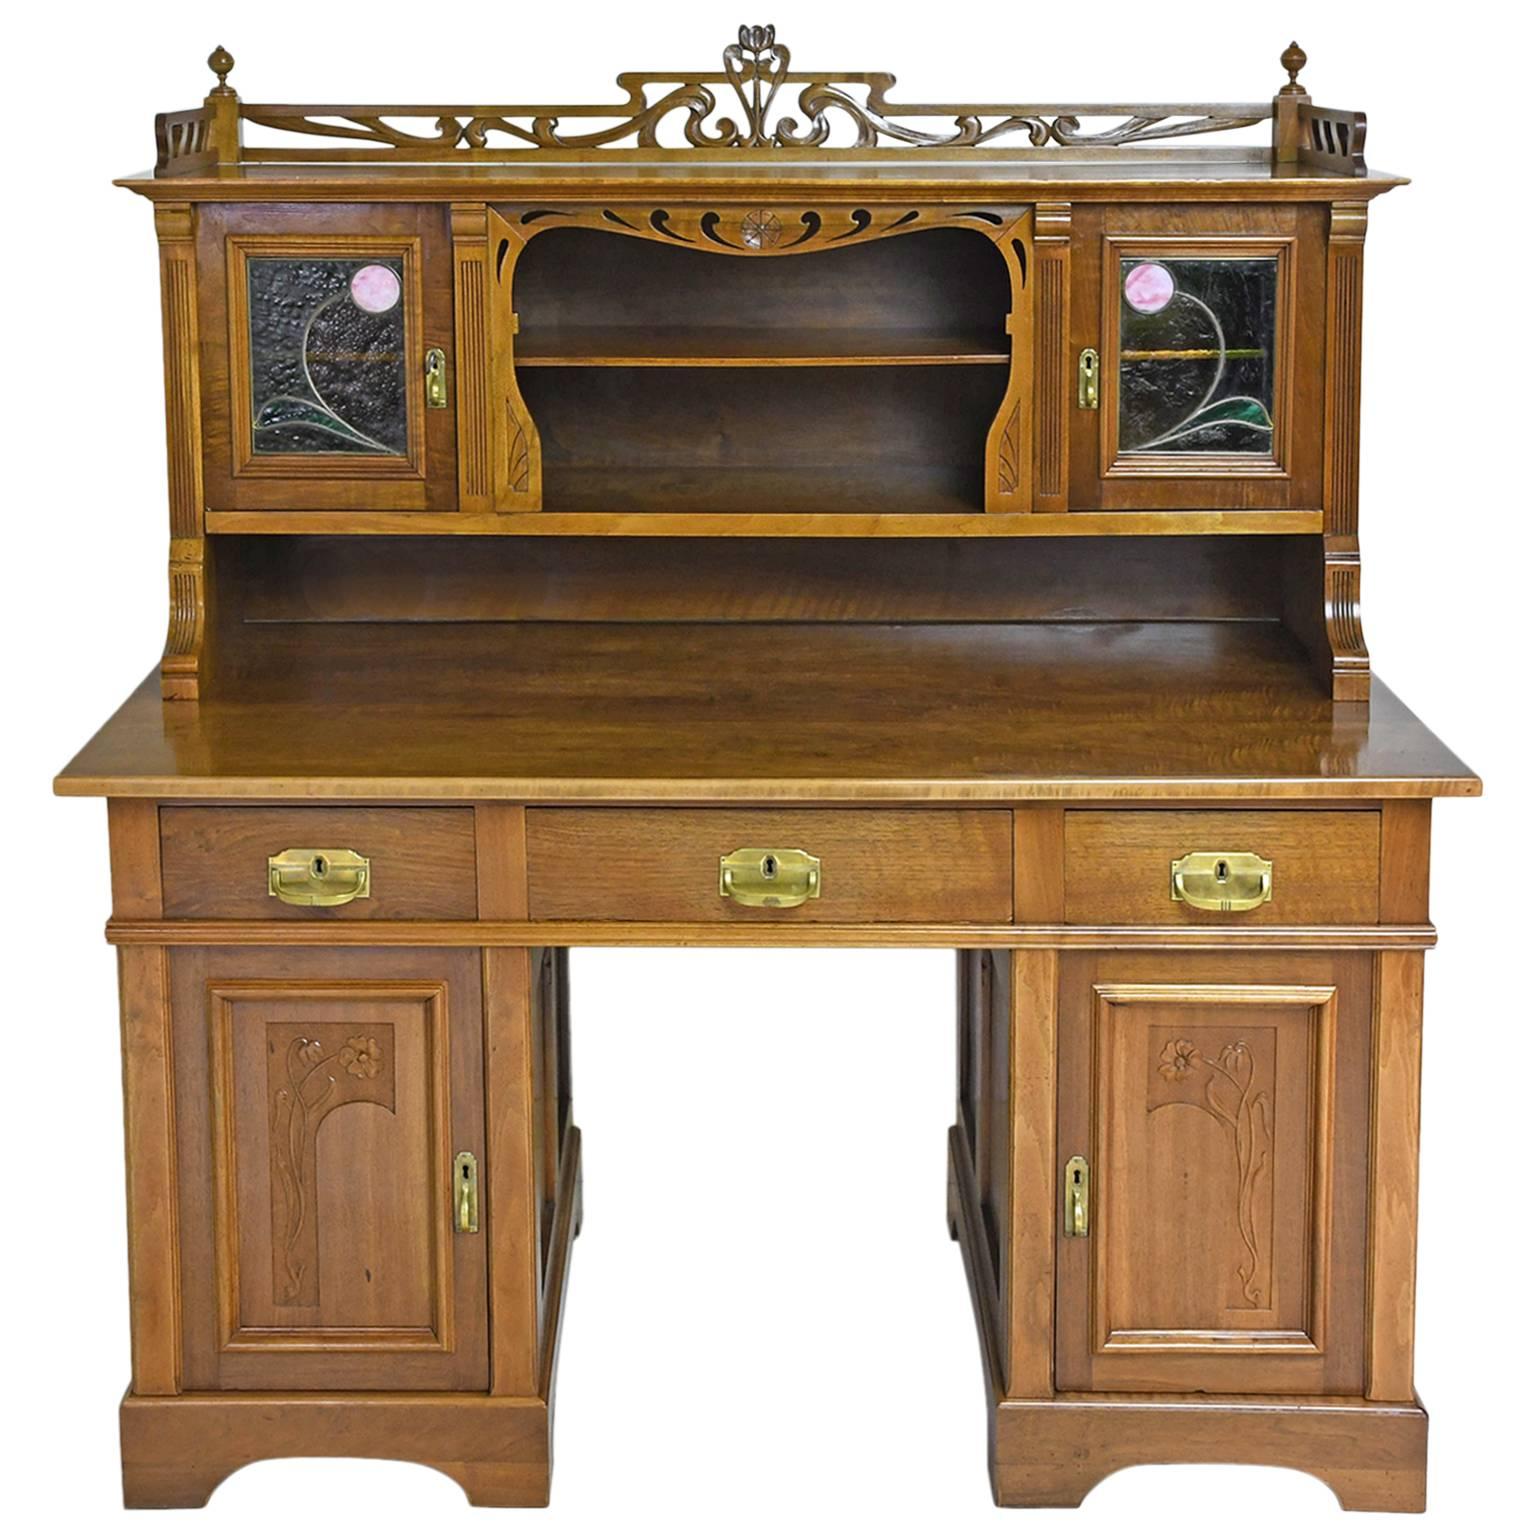 Art Nouveau Walnut Pedestal Desk with Upper Cabinet and Stained Glass, C. 1900